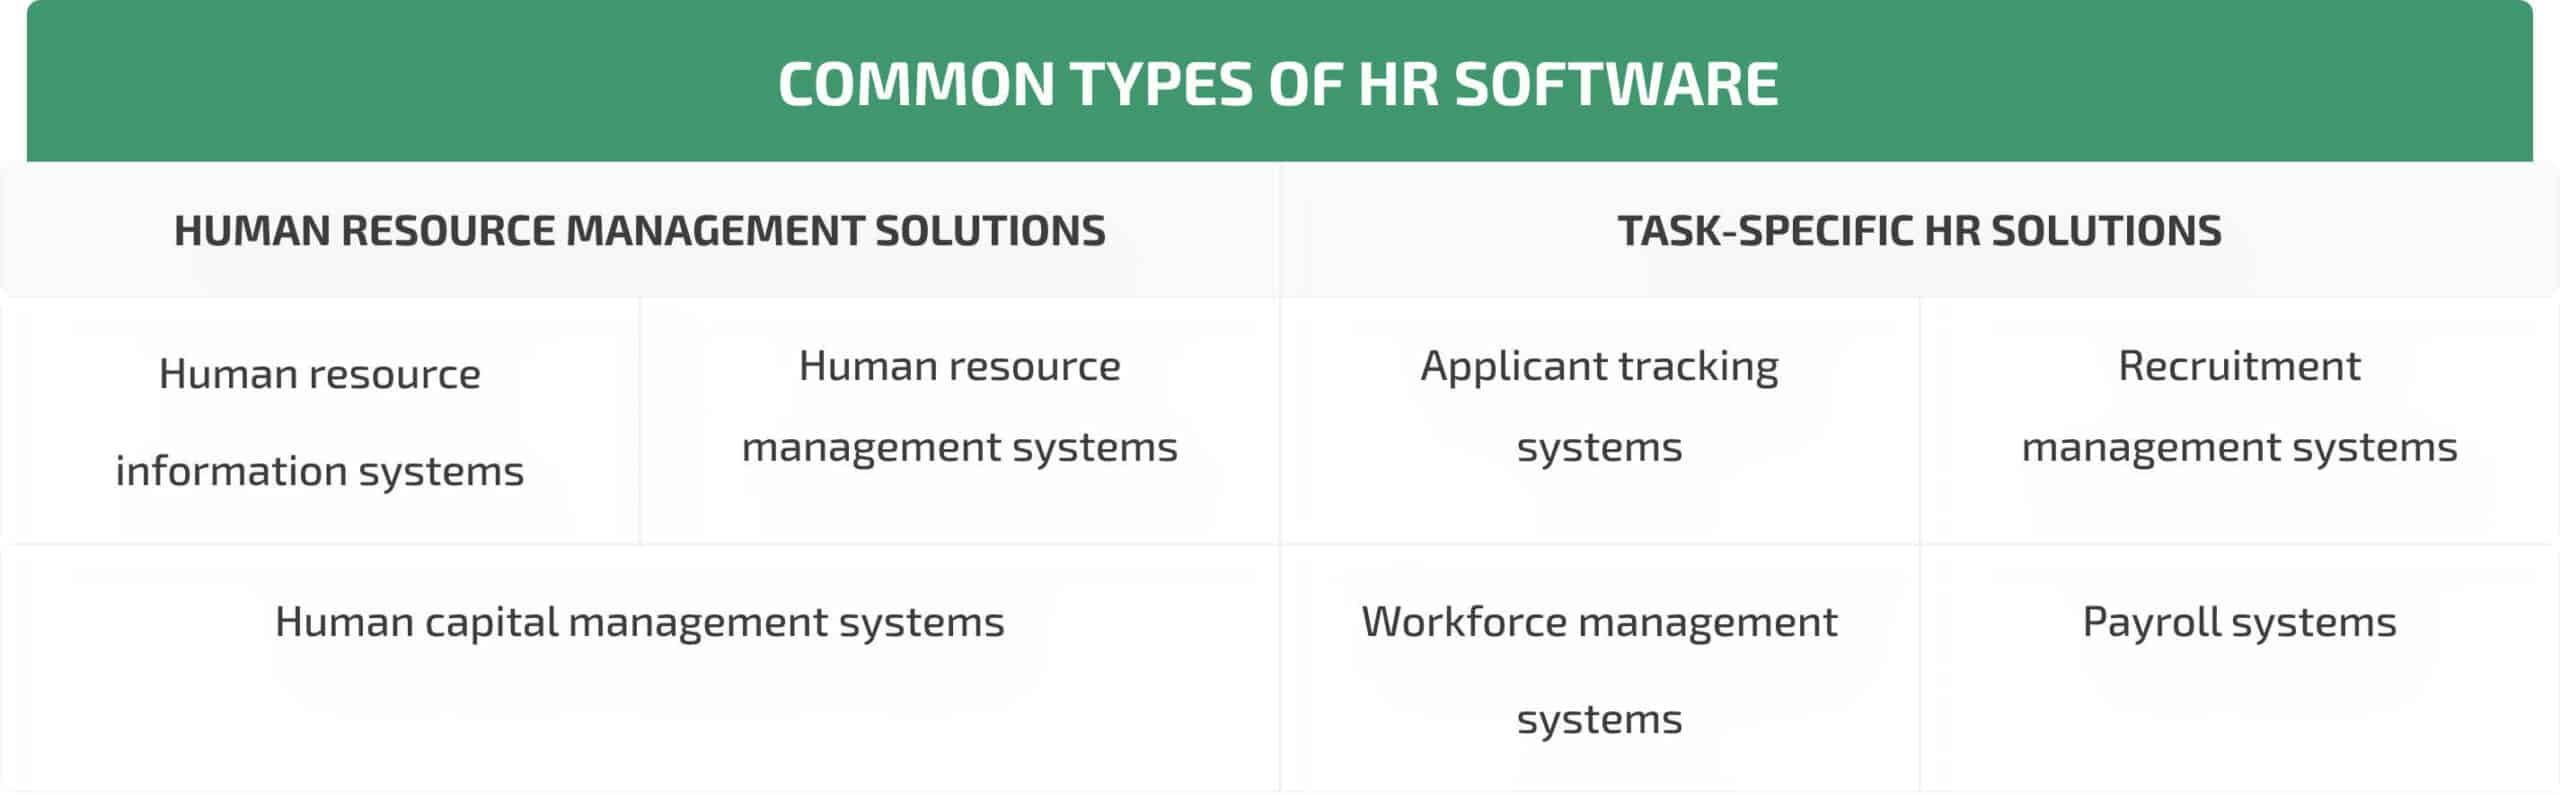  common types of HR software